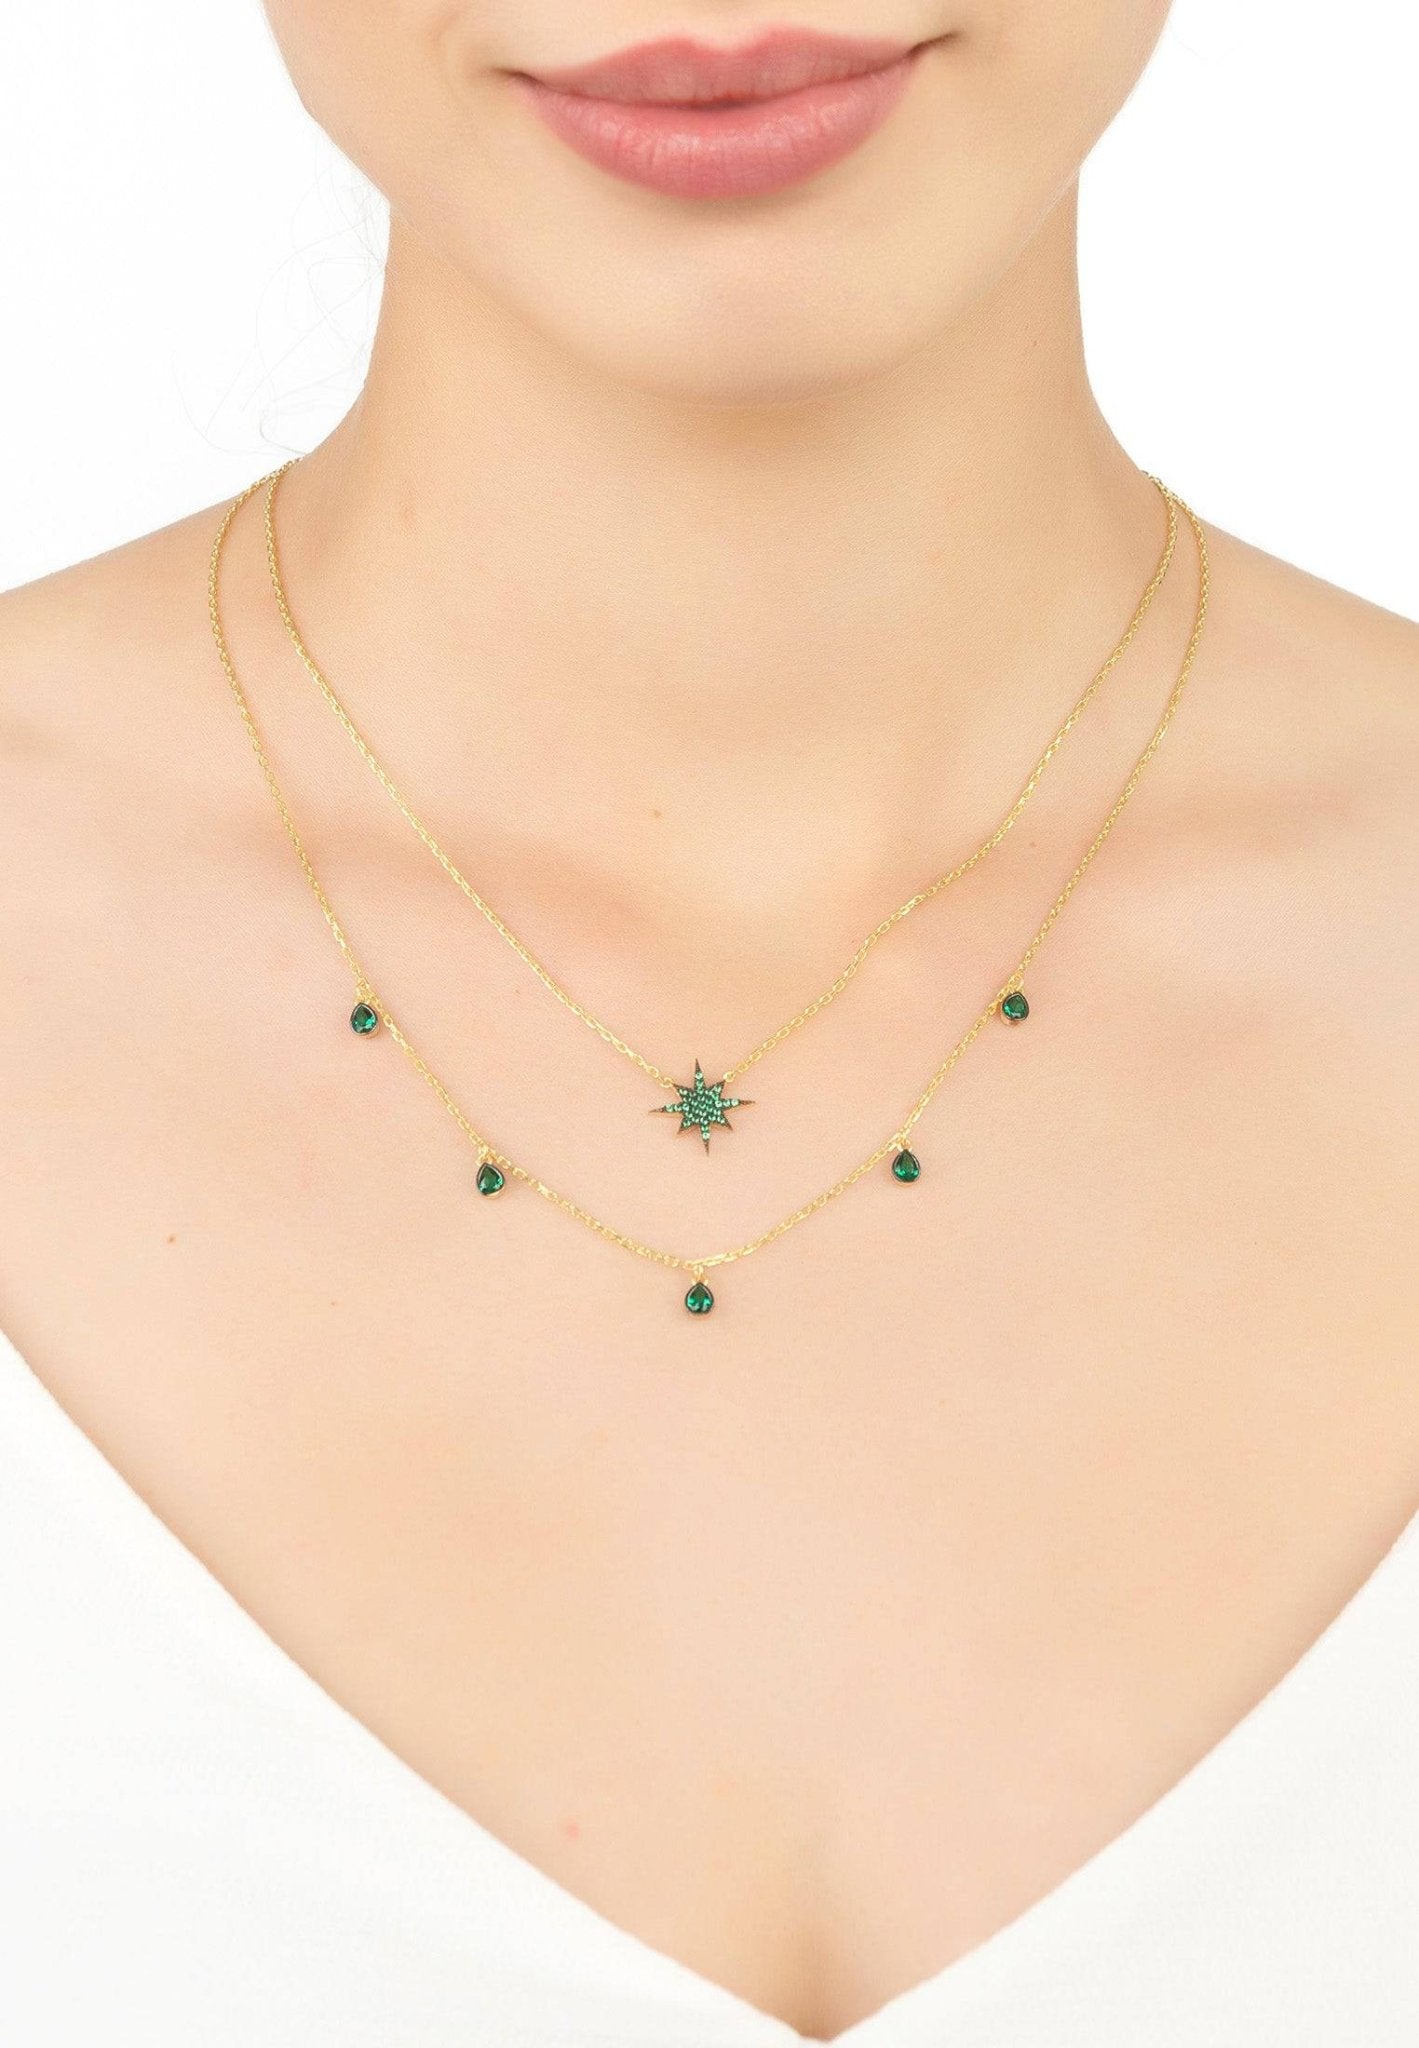 Starburst Double Strand Layered Necklace Gold Green - LATELITA Necklaces